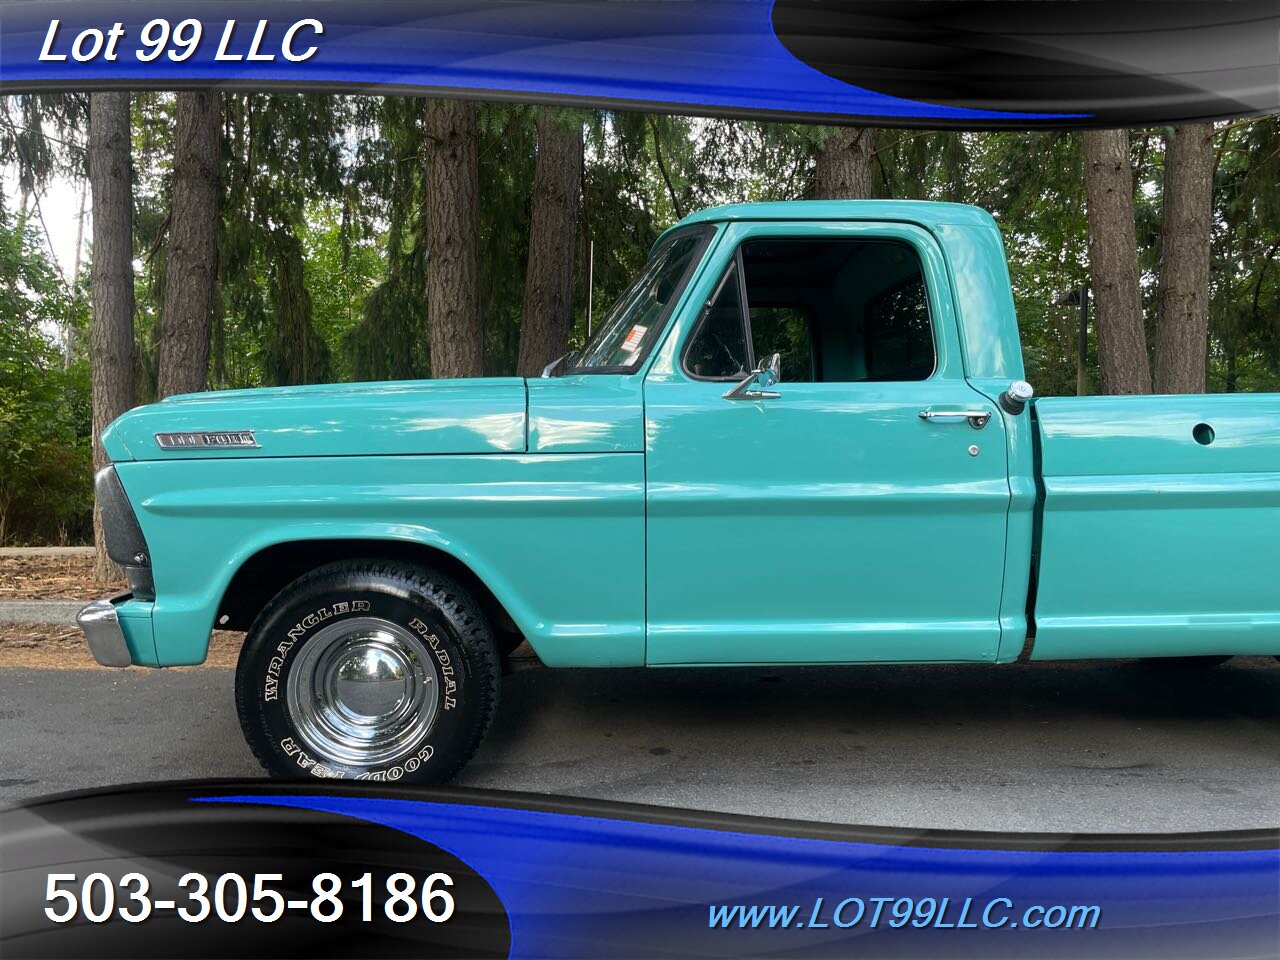 1967 Ford F-100 302 V8  Long Bed No Rust Solid Truck   - Photo 37 - Milwaukie, OR 97267